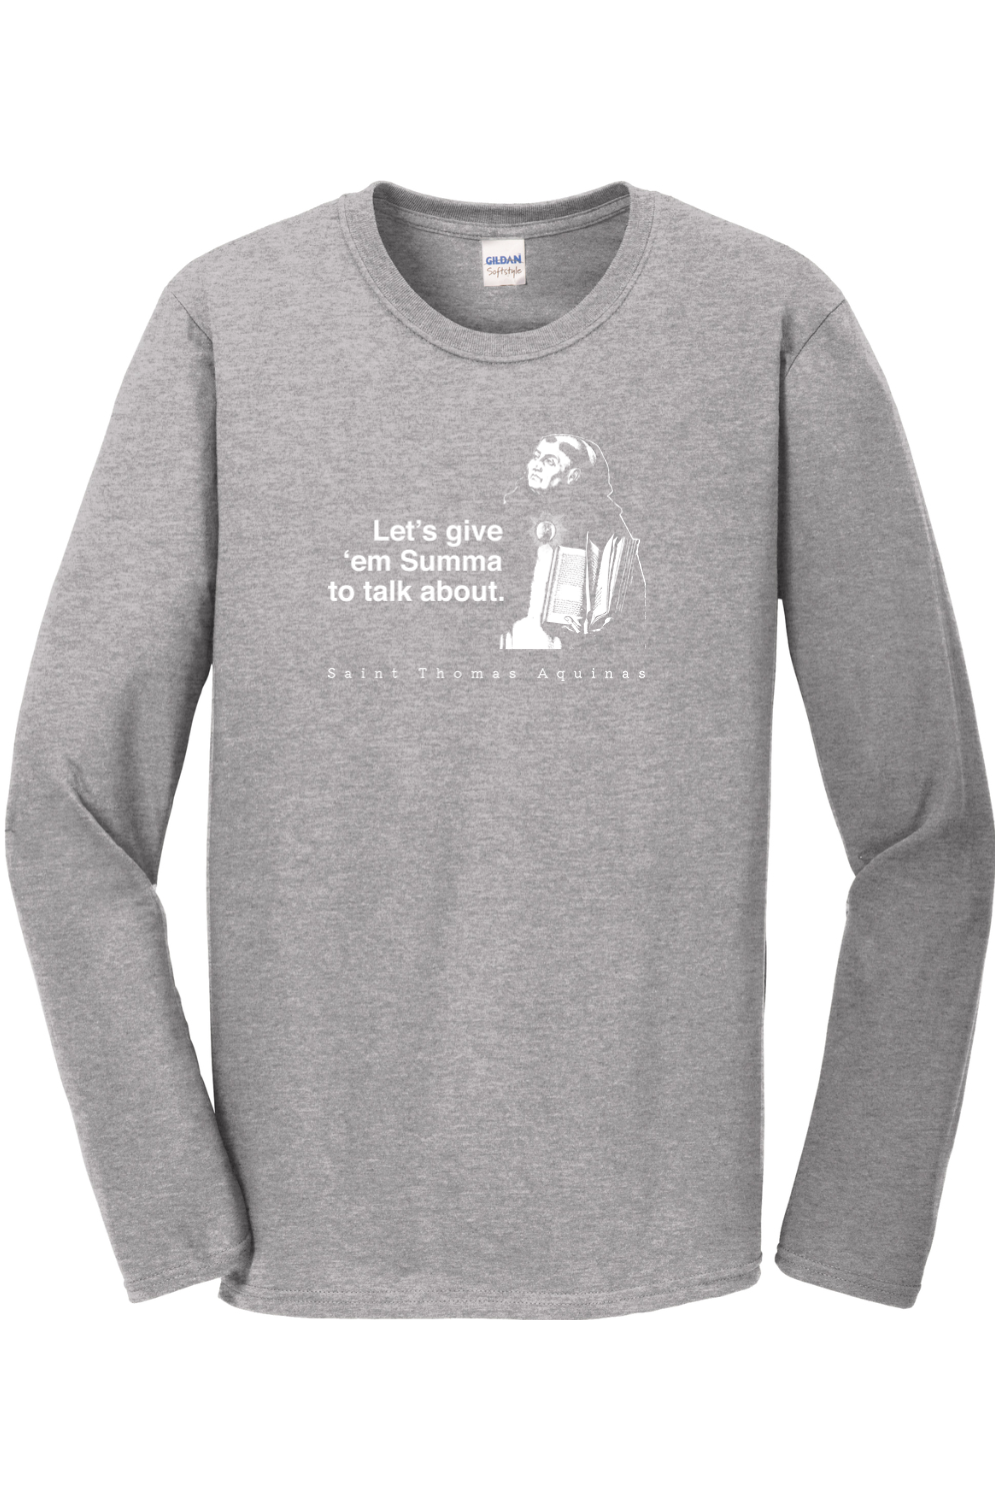 Let's Give 'em Summa to Talk About - St Thomas Aquinas Long Sleeve